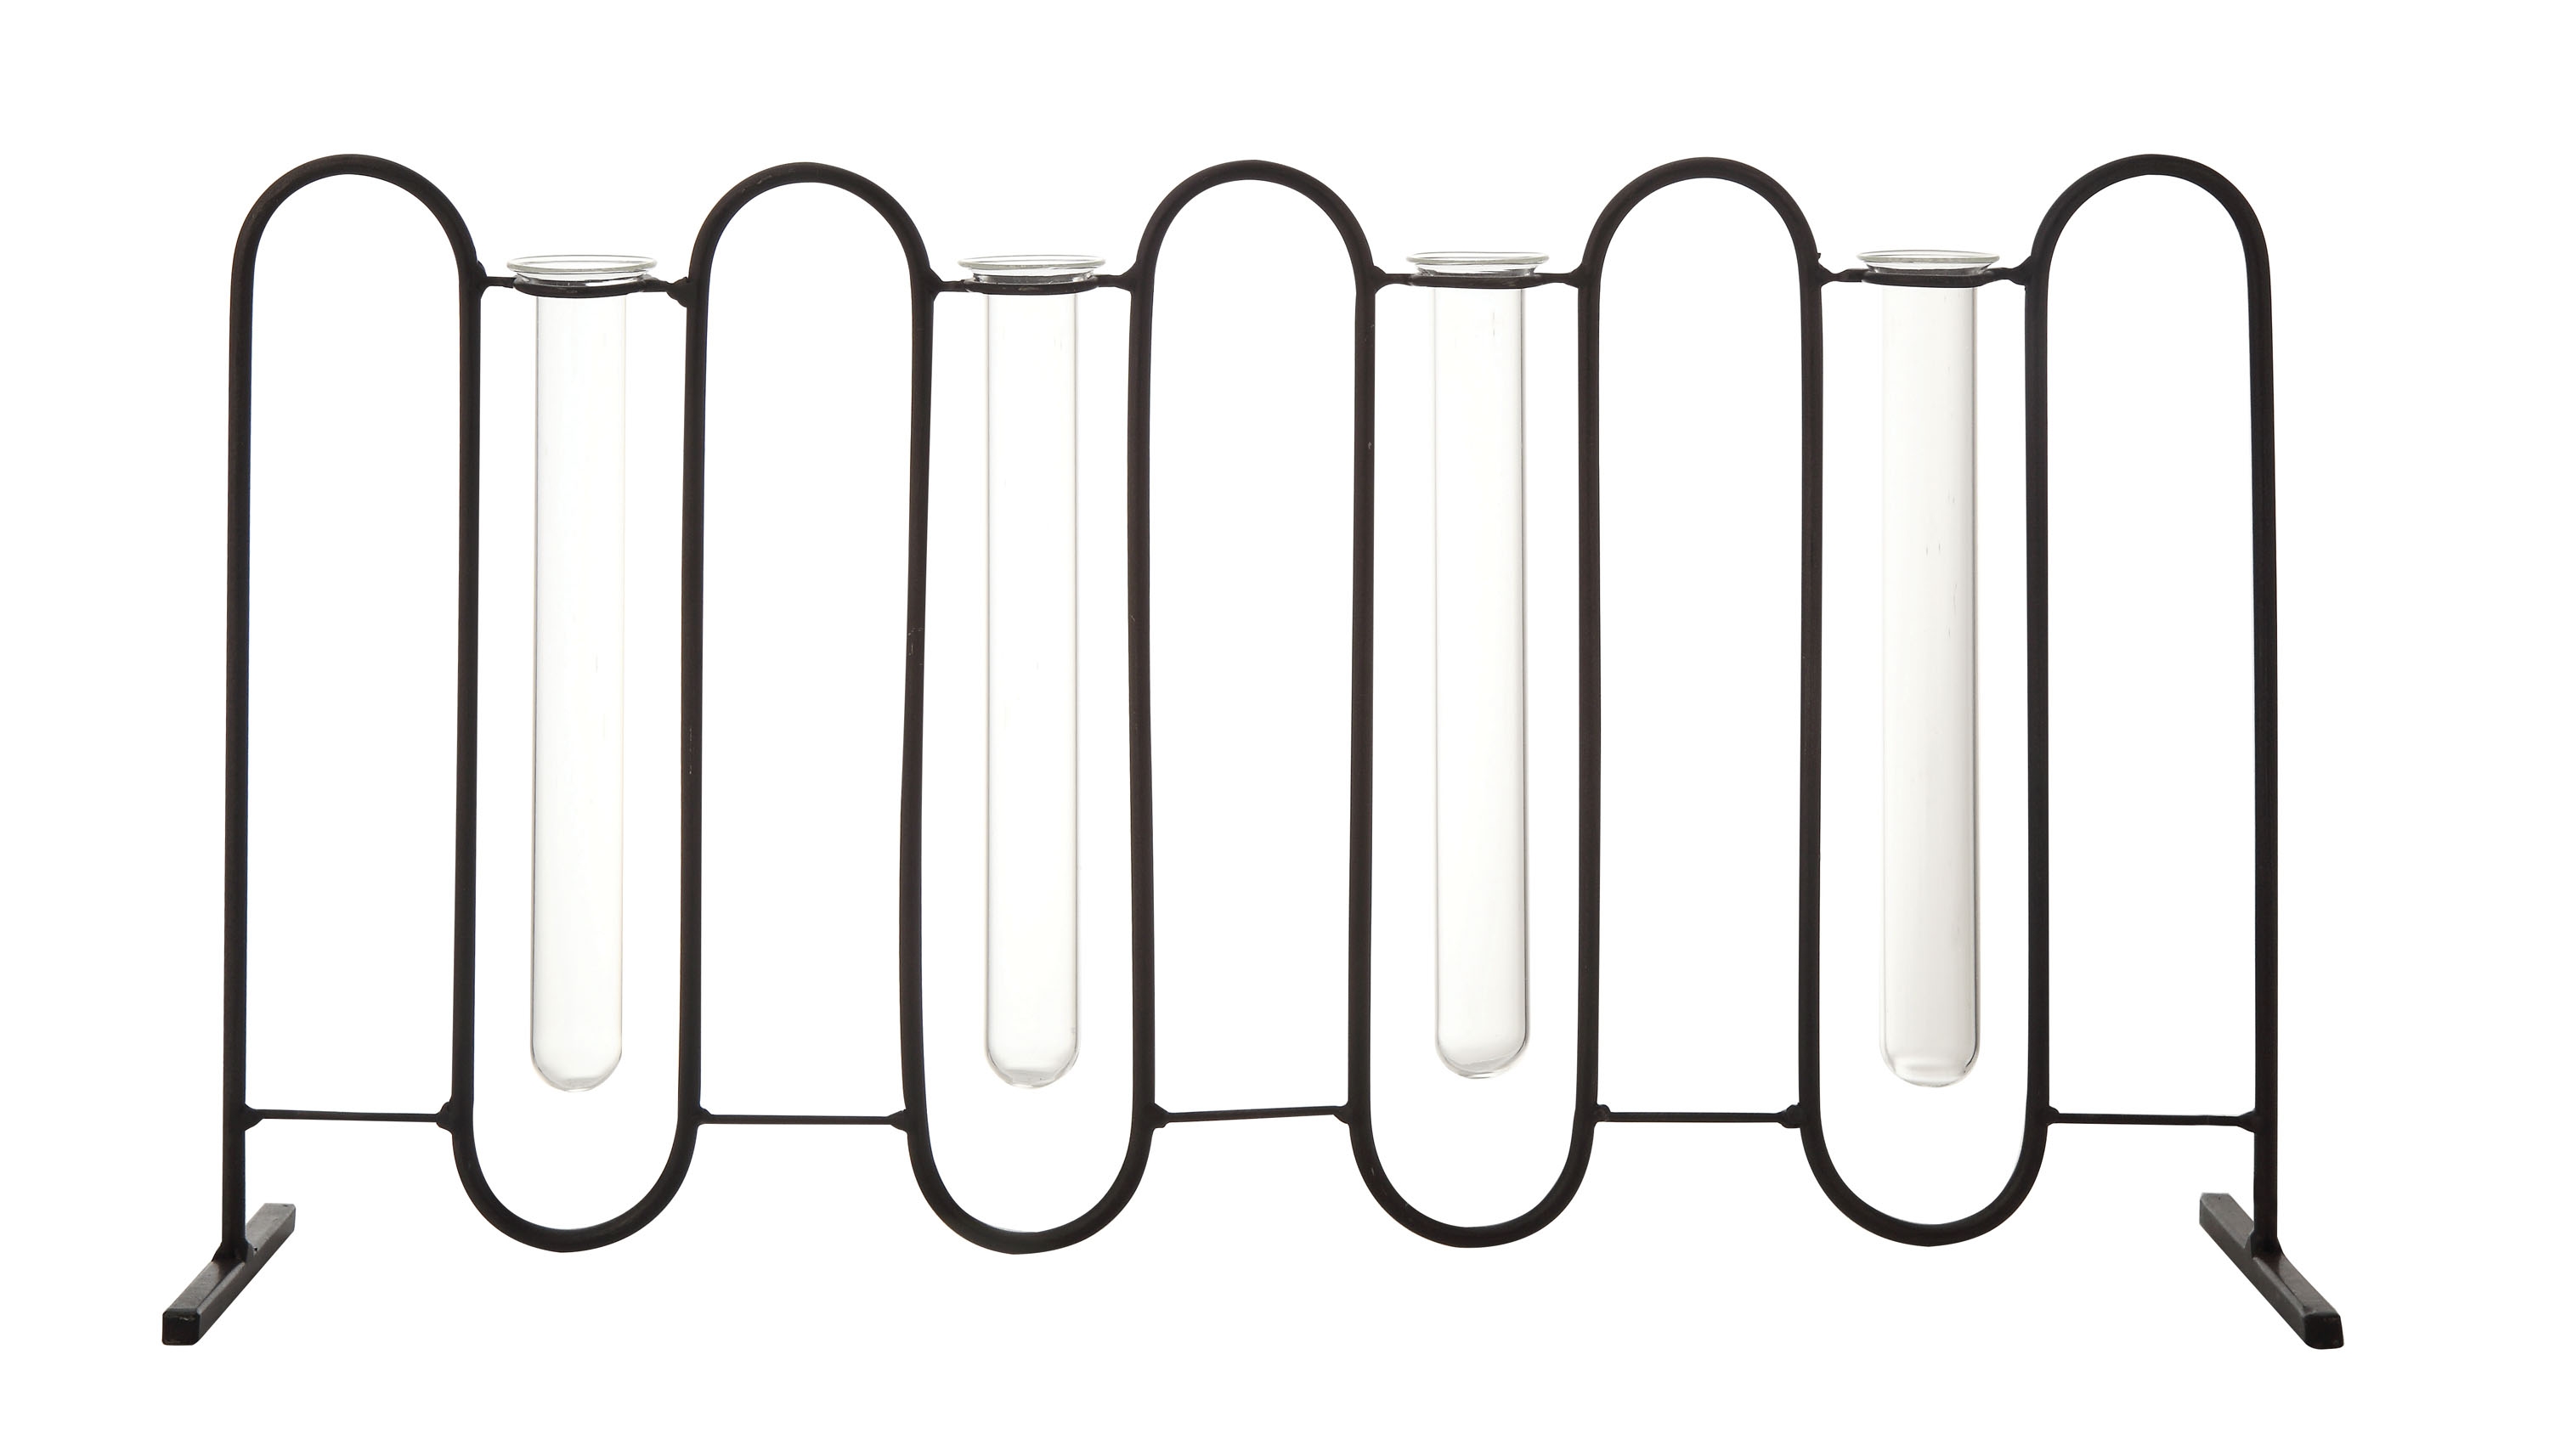 Four Test Tube Bud Vases in Metal Stand (Set of 5 Pieces) - Image 0